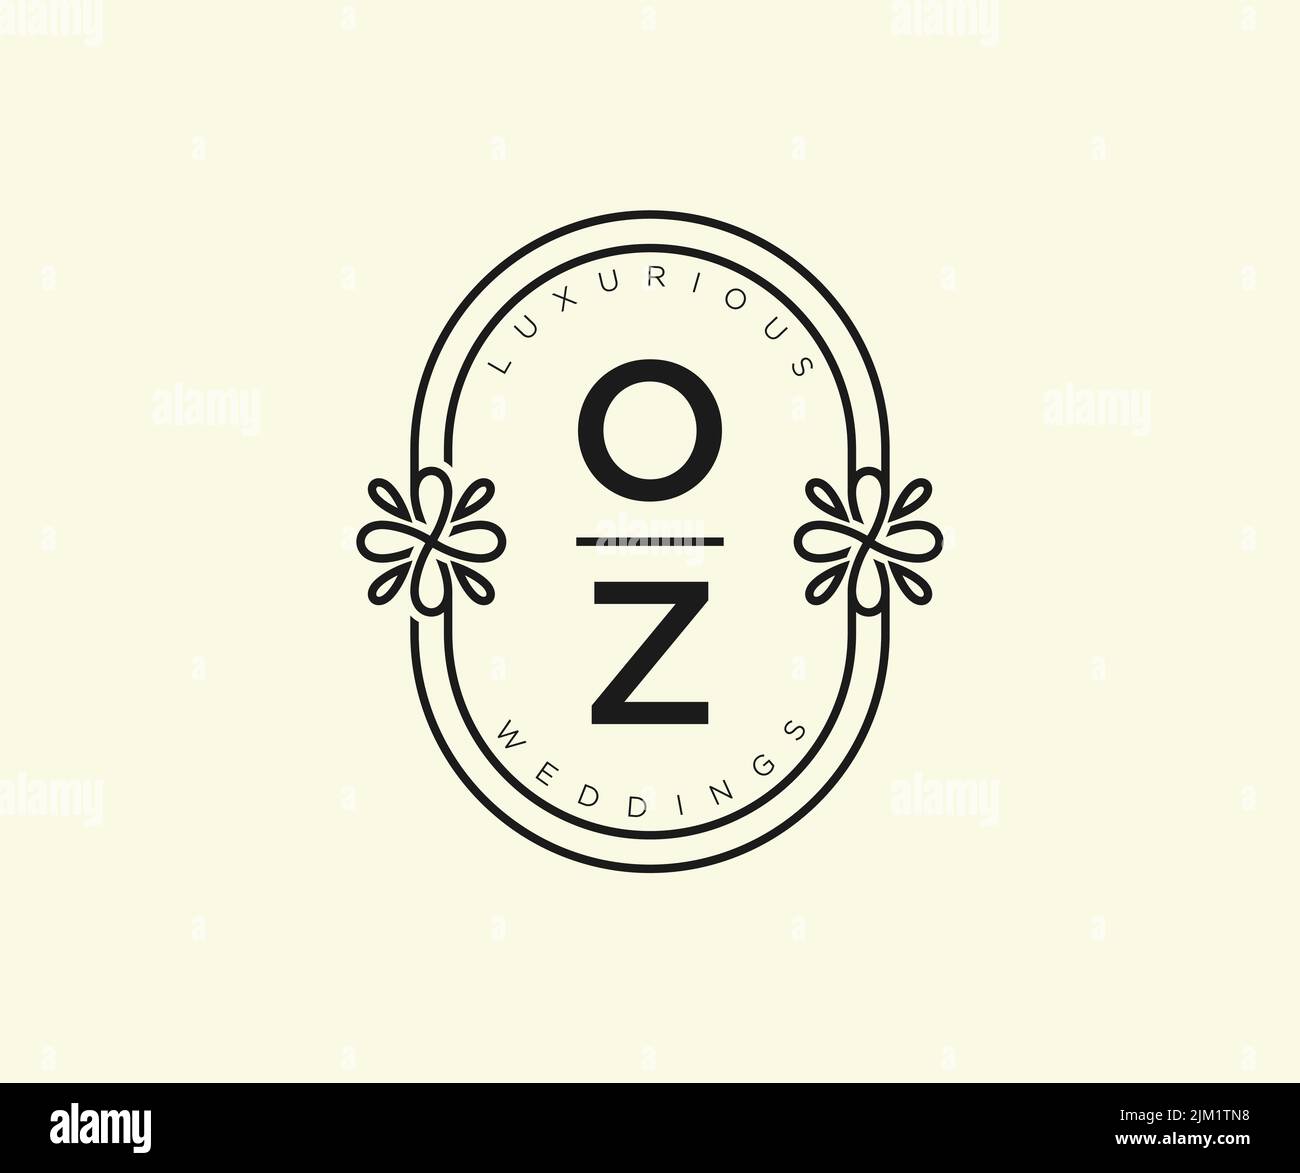 OZ Initials letter Wedding monogram logos template, hand drawn modern minimalistic and floral templates for Invitation cards, Save the Date, elegant Stock Vector